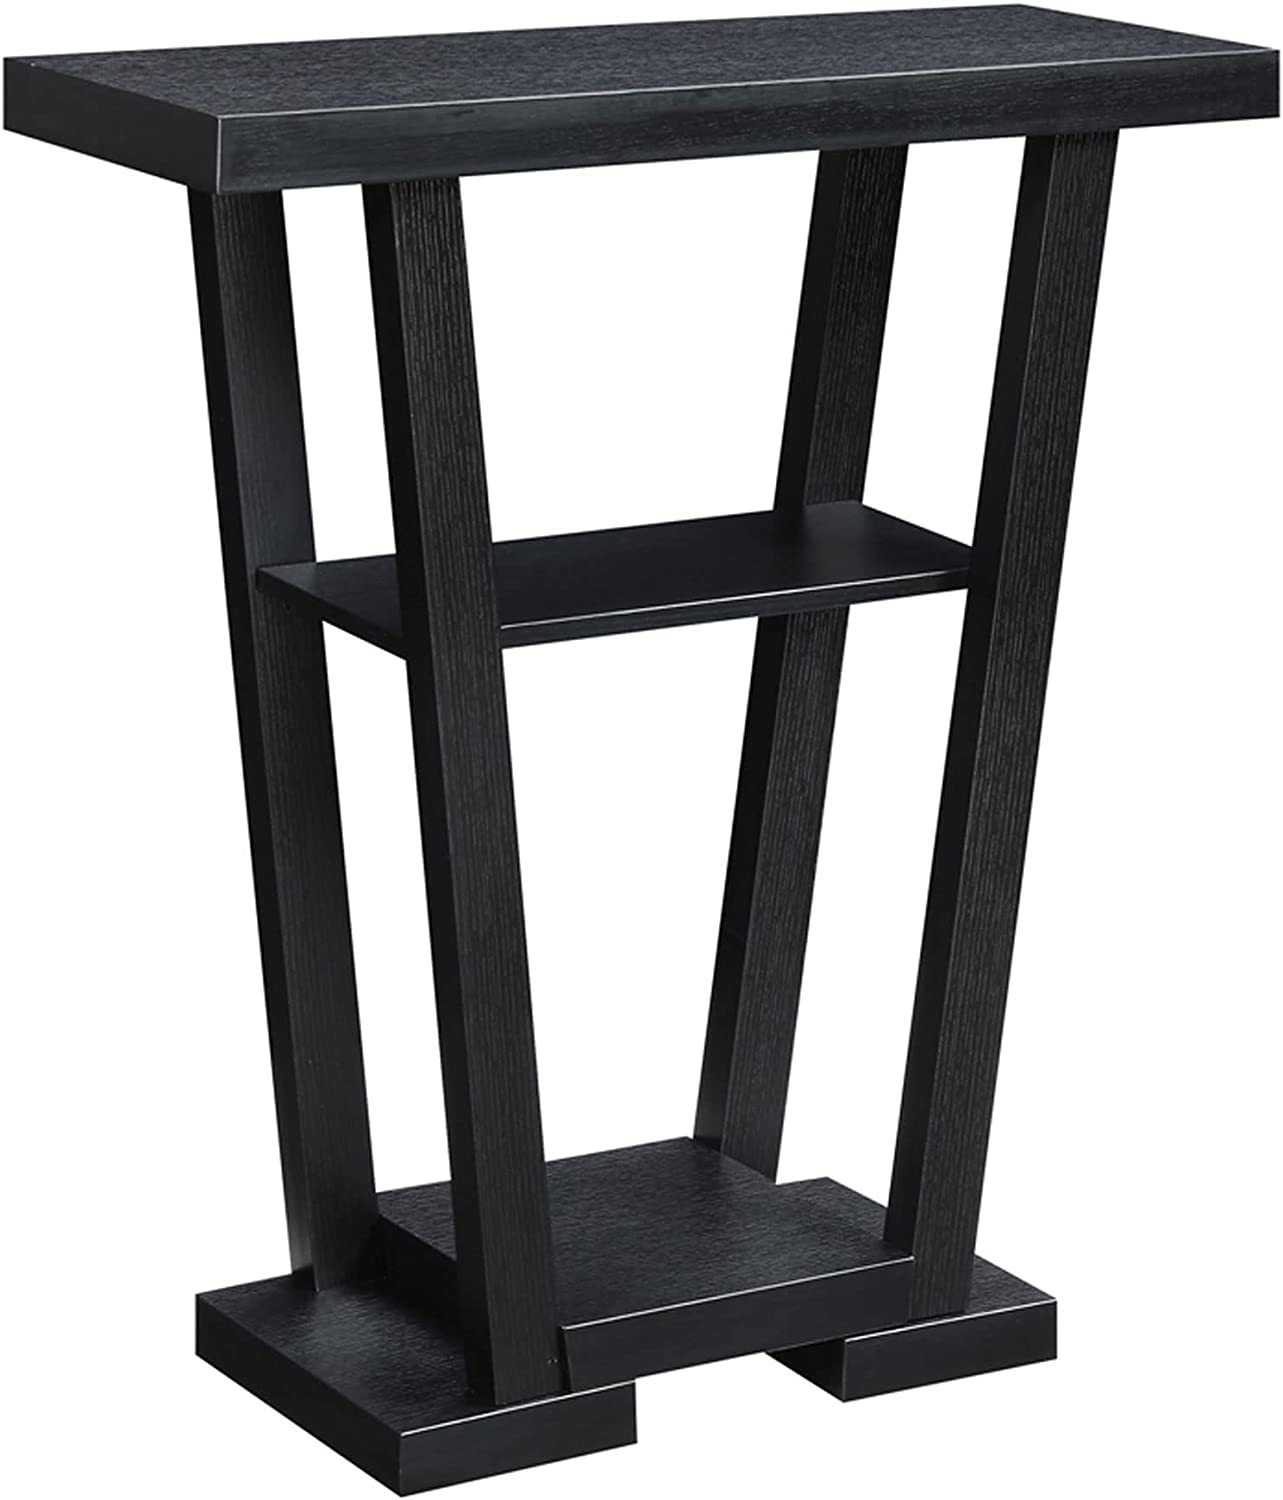 Newport V Console From Convenience Concepts In Black. - $112.96